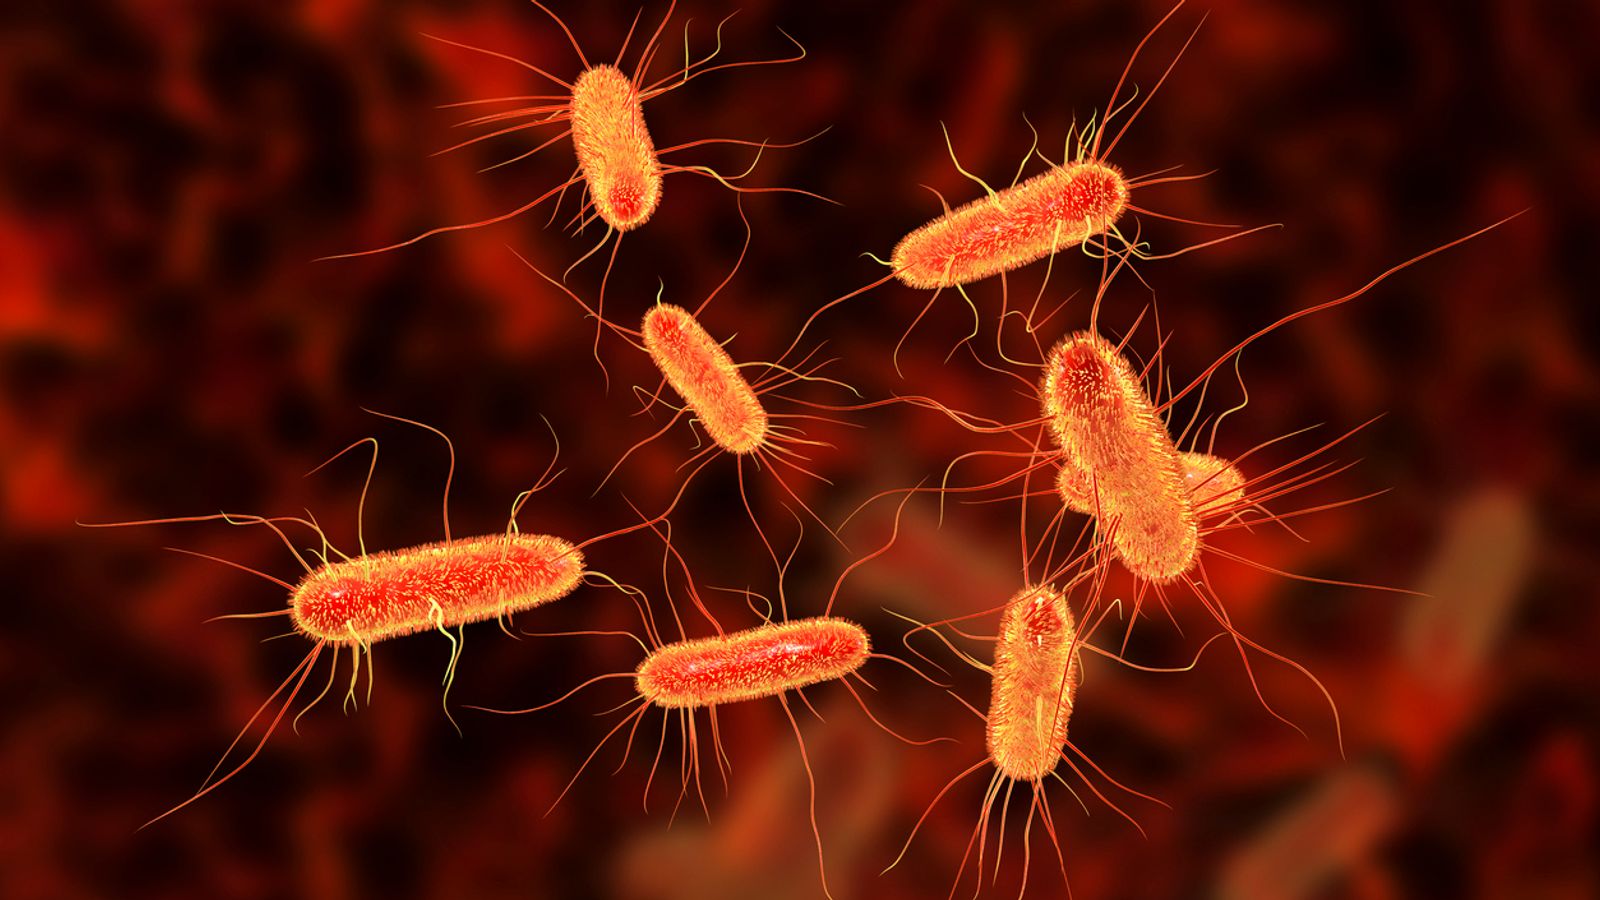 Urgent health warning after E.coli outbreak linked to 'nationally distributed food item'